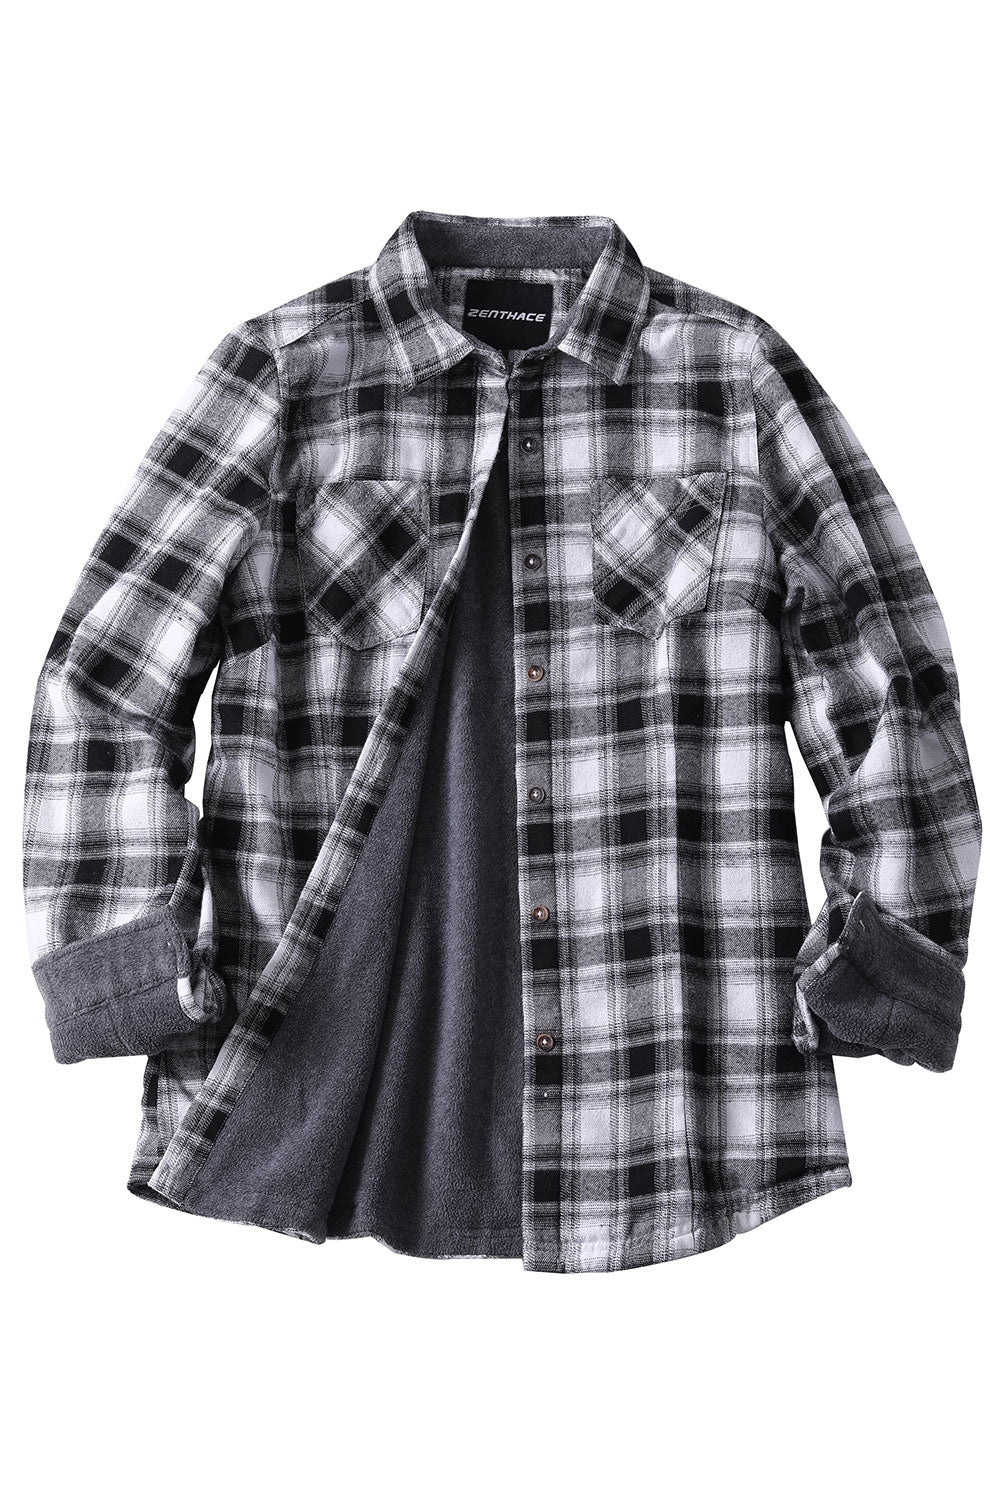 ZENTHACE Women's Thermal Fleece Lined Plaid Button Down Flannel